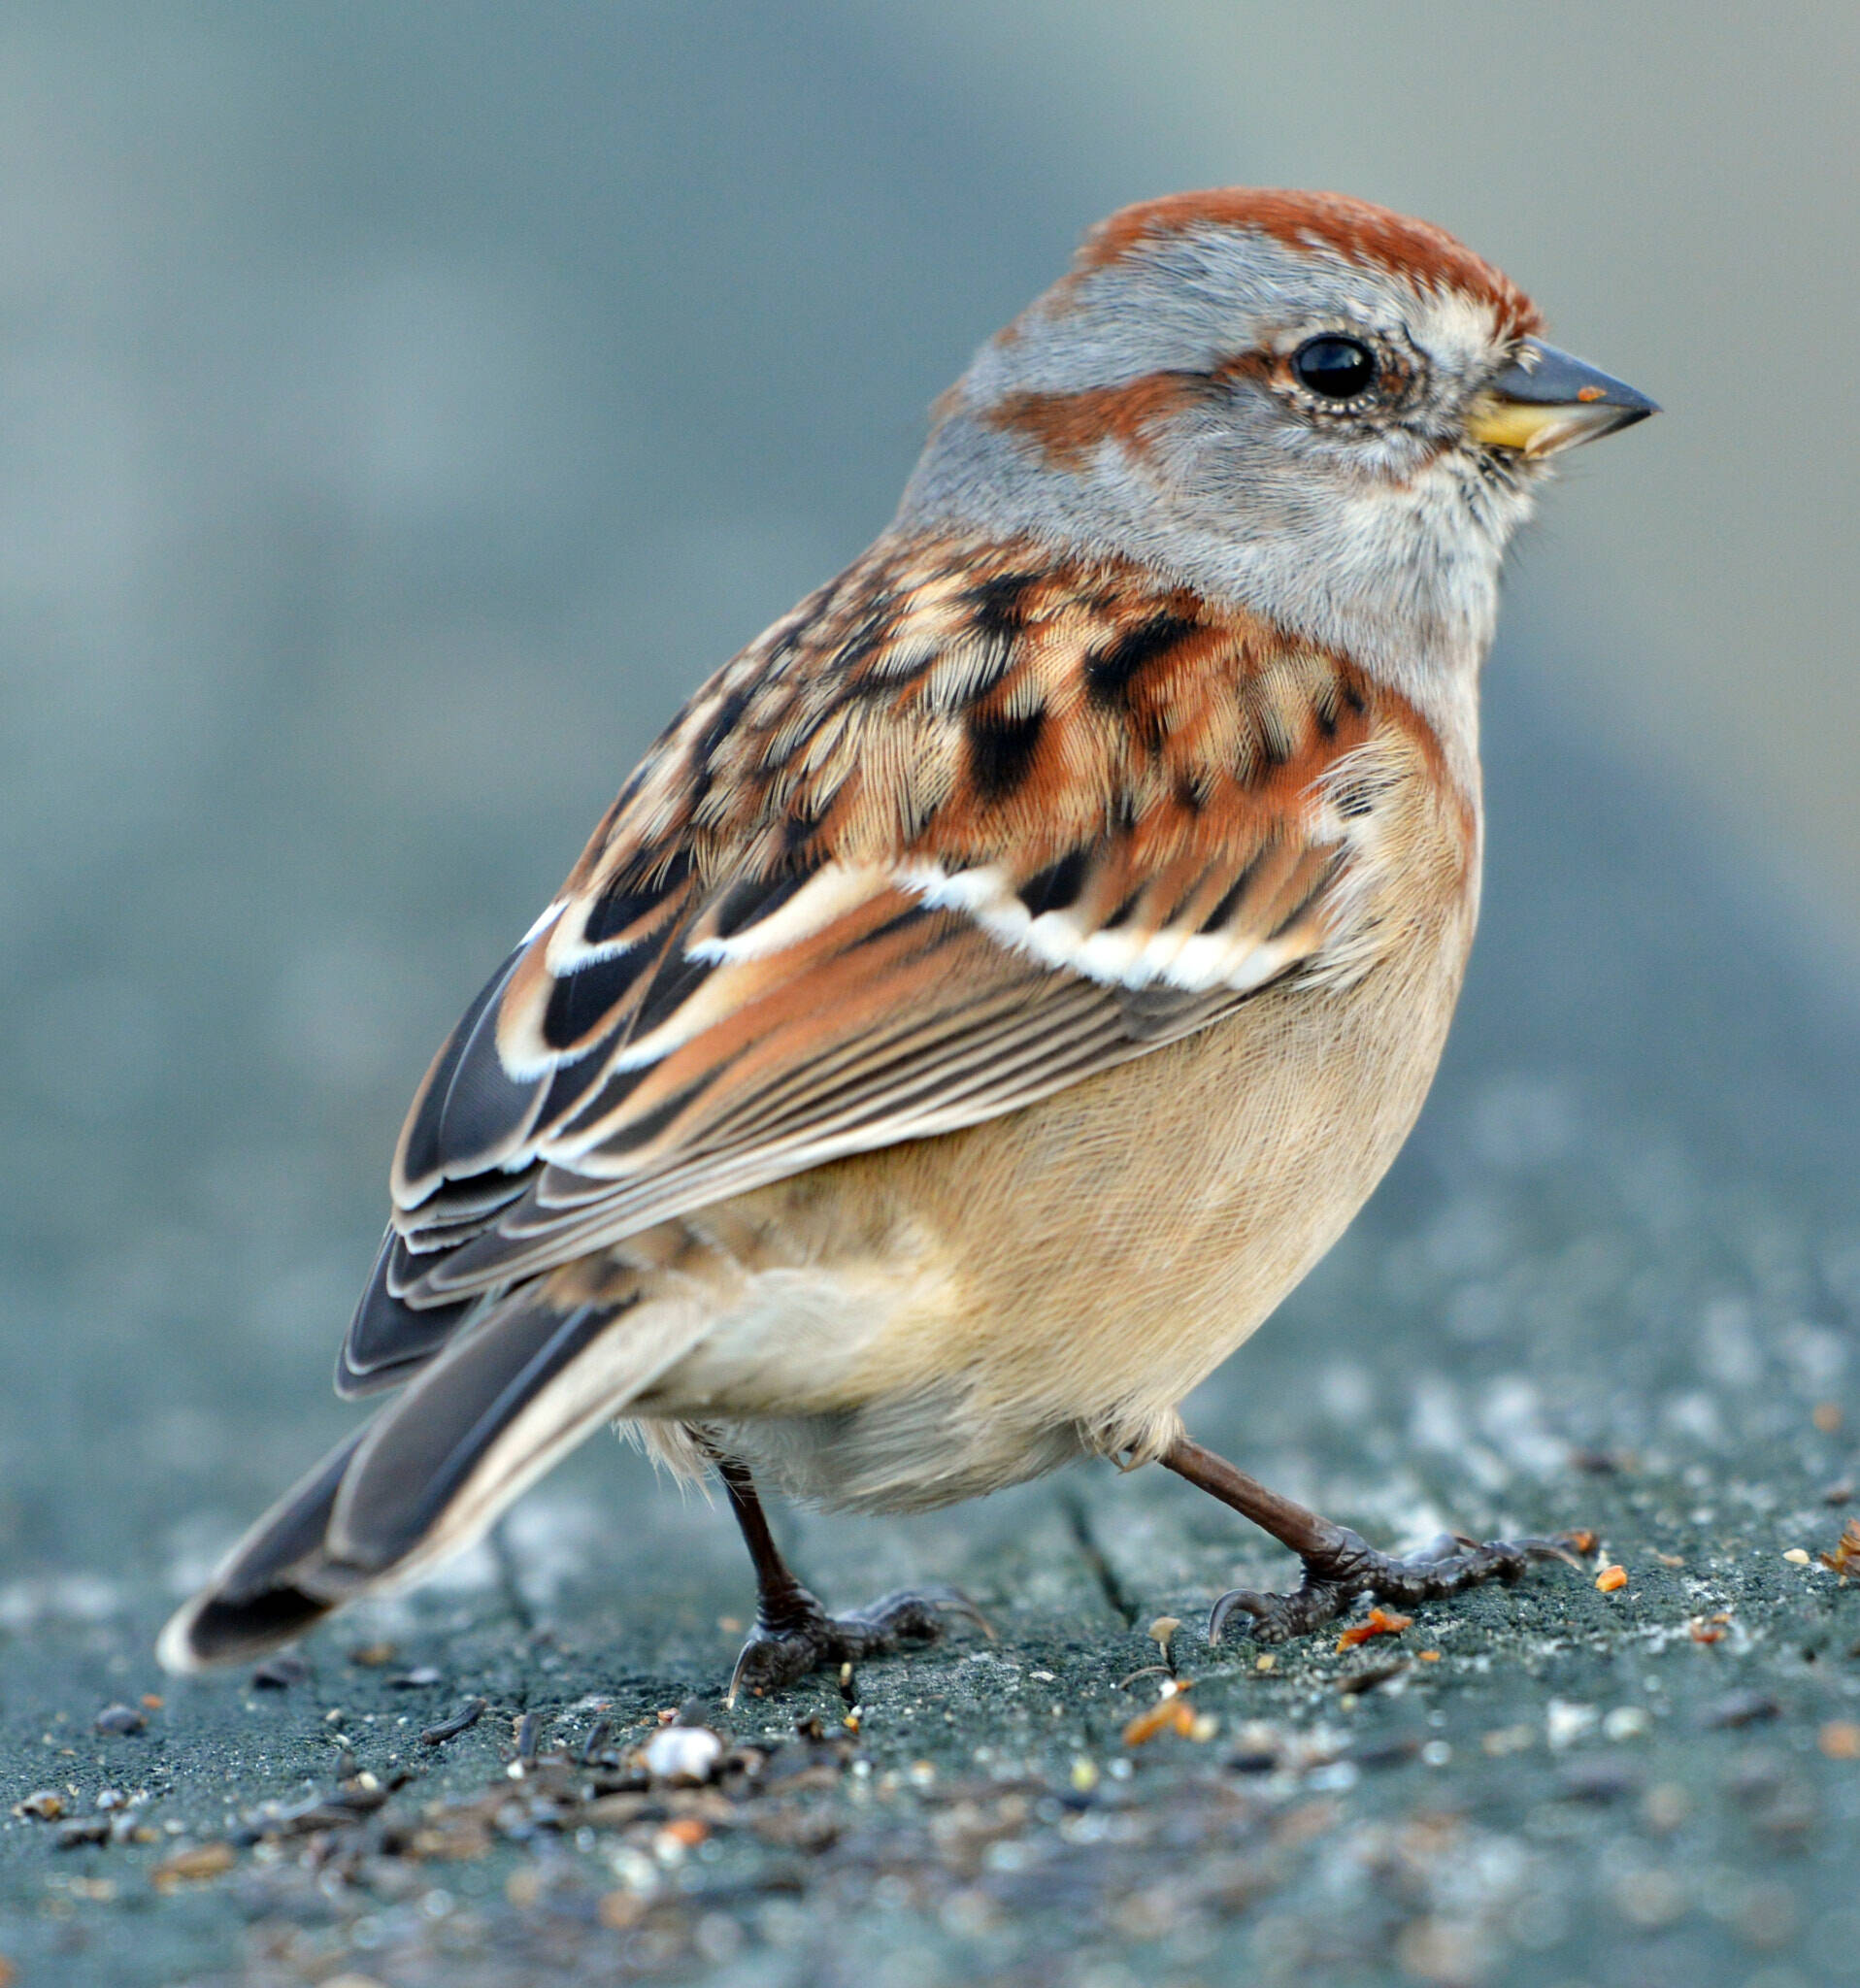 This photo available under a Creative Commons license shows an American tree sparrow. (Courtesy Photo / Jocelyn Anderson)